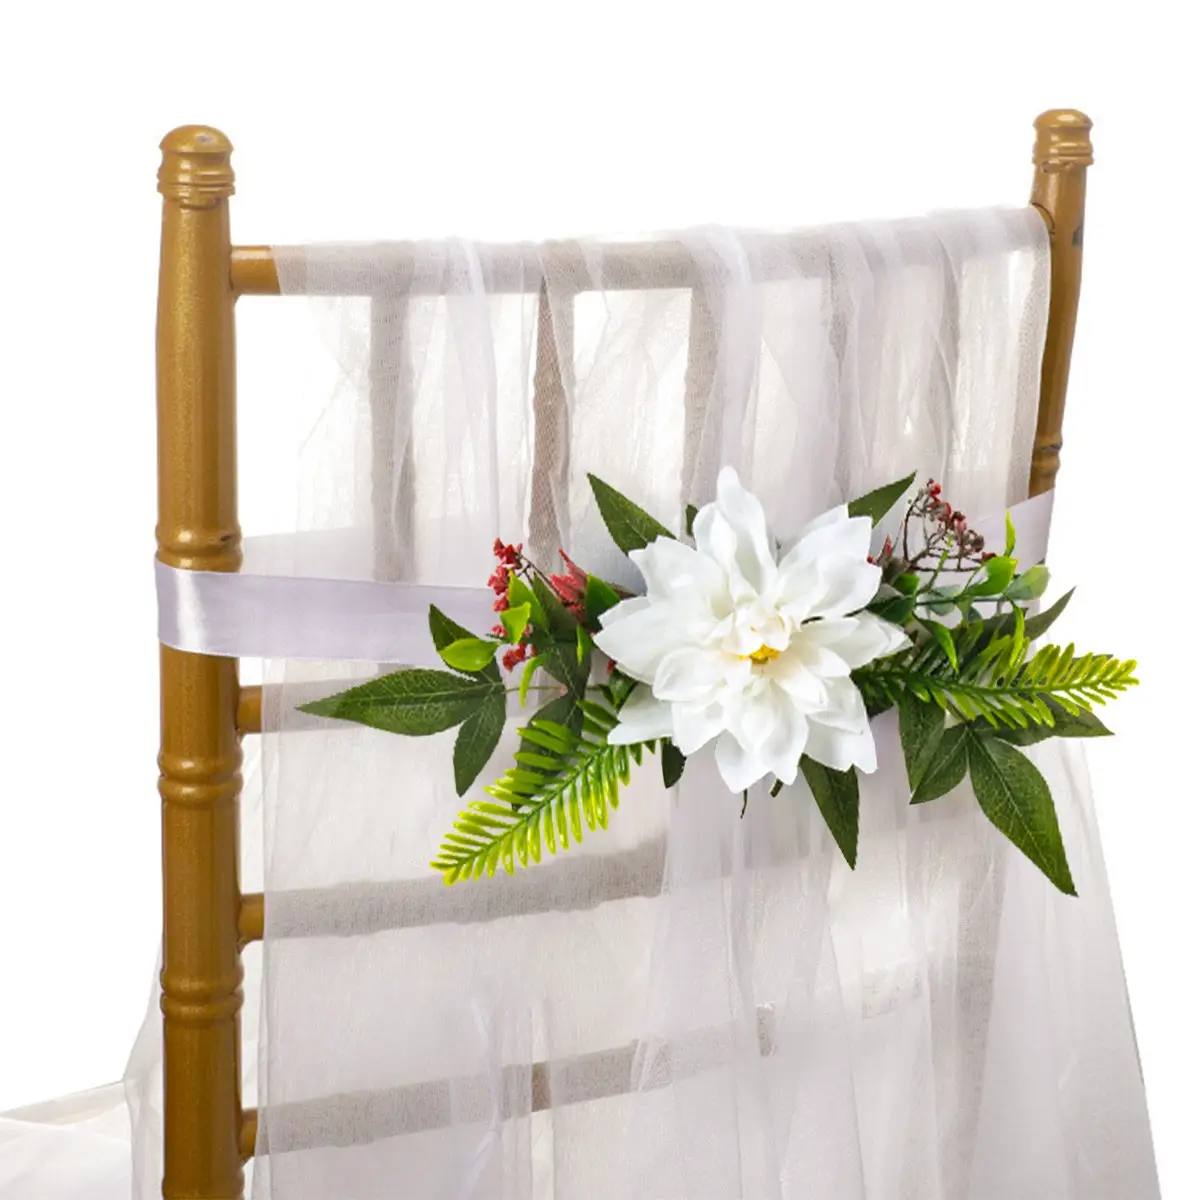 Artificial Wedding Flowers White Aisle Chair Decorations Church Chair Bench Pew Bows with Ribbon for Wedding Ceremony Party home